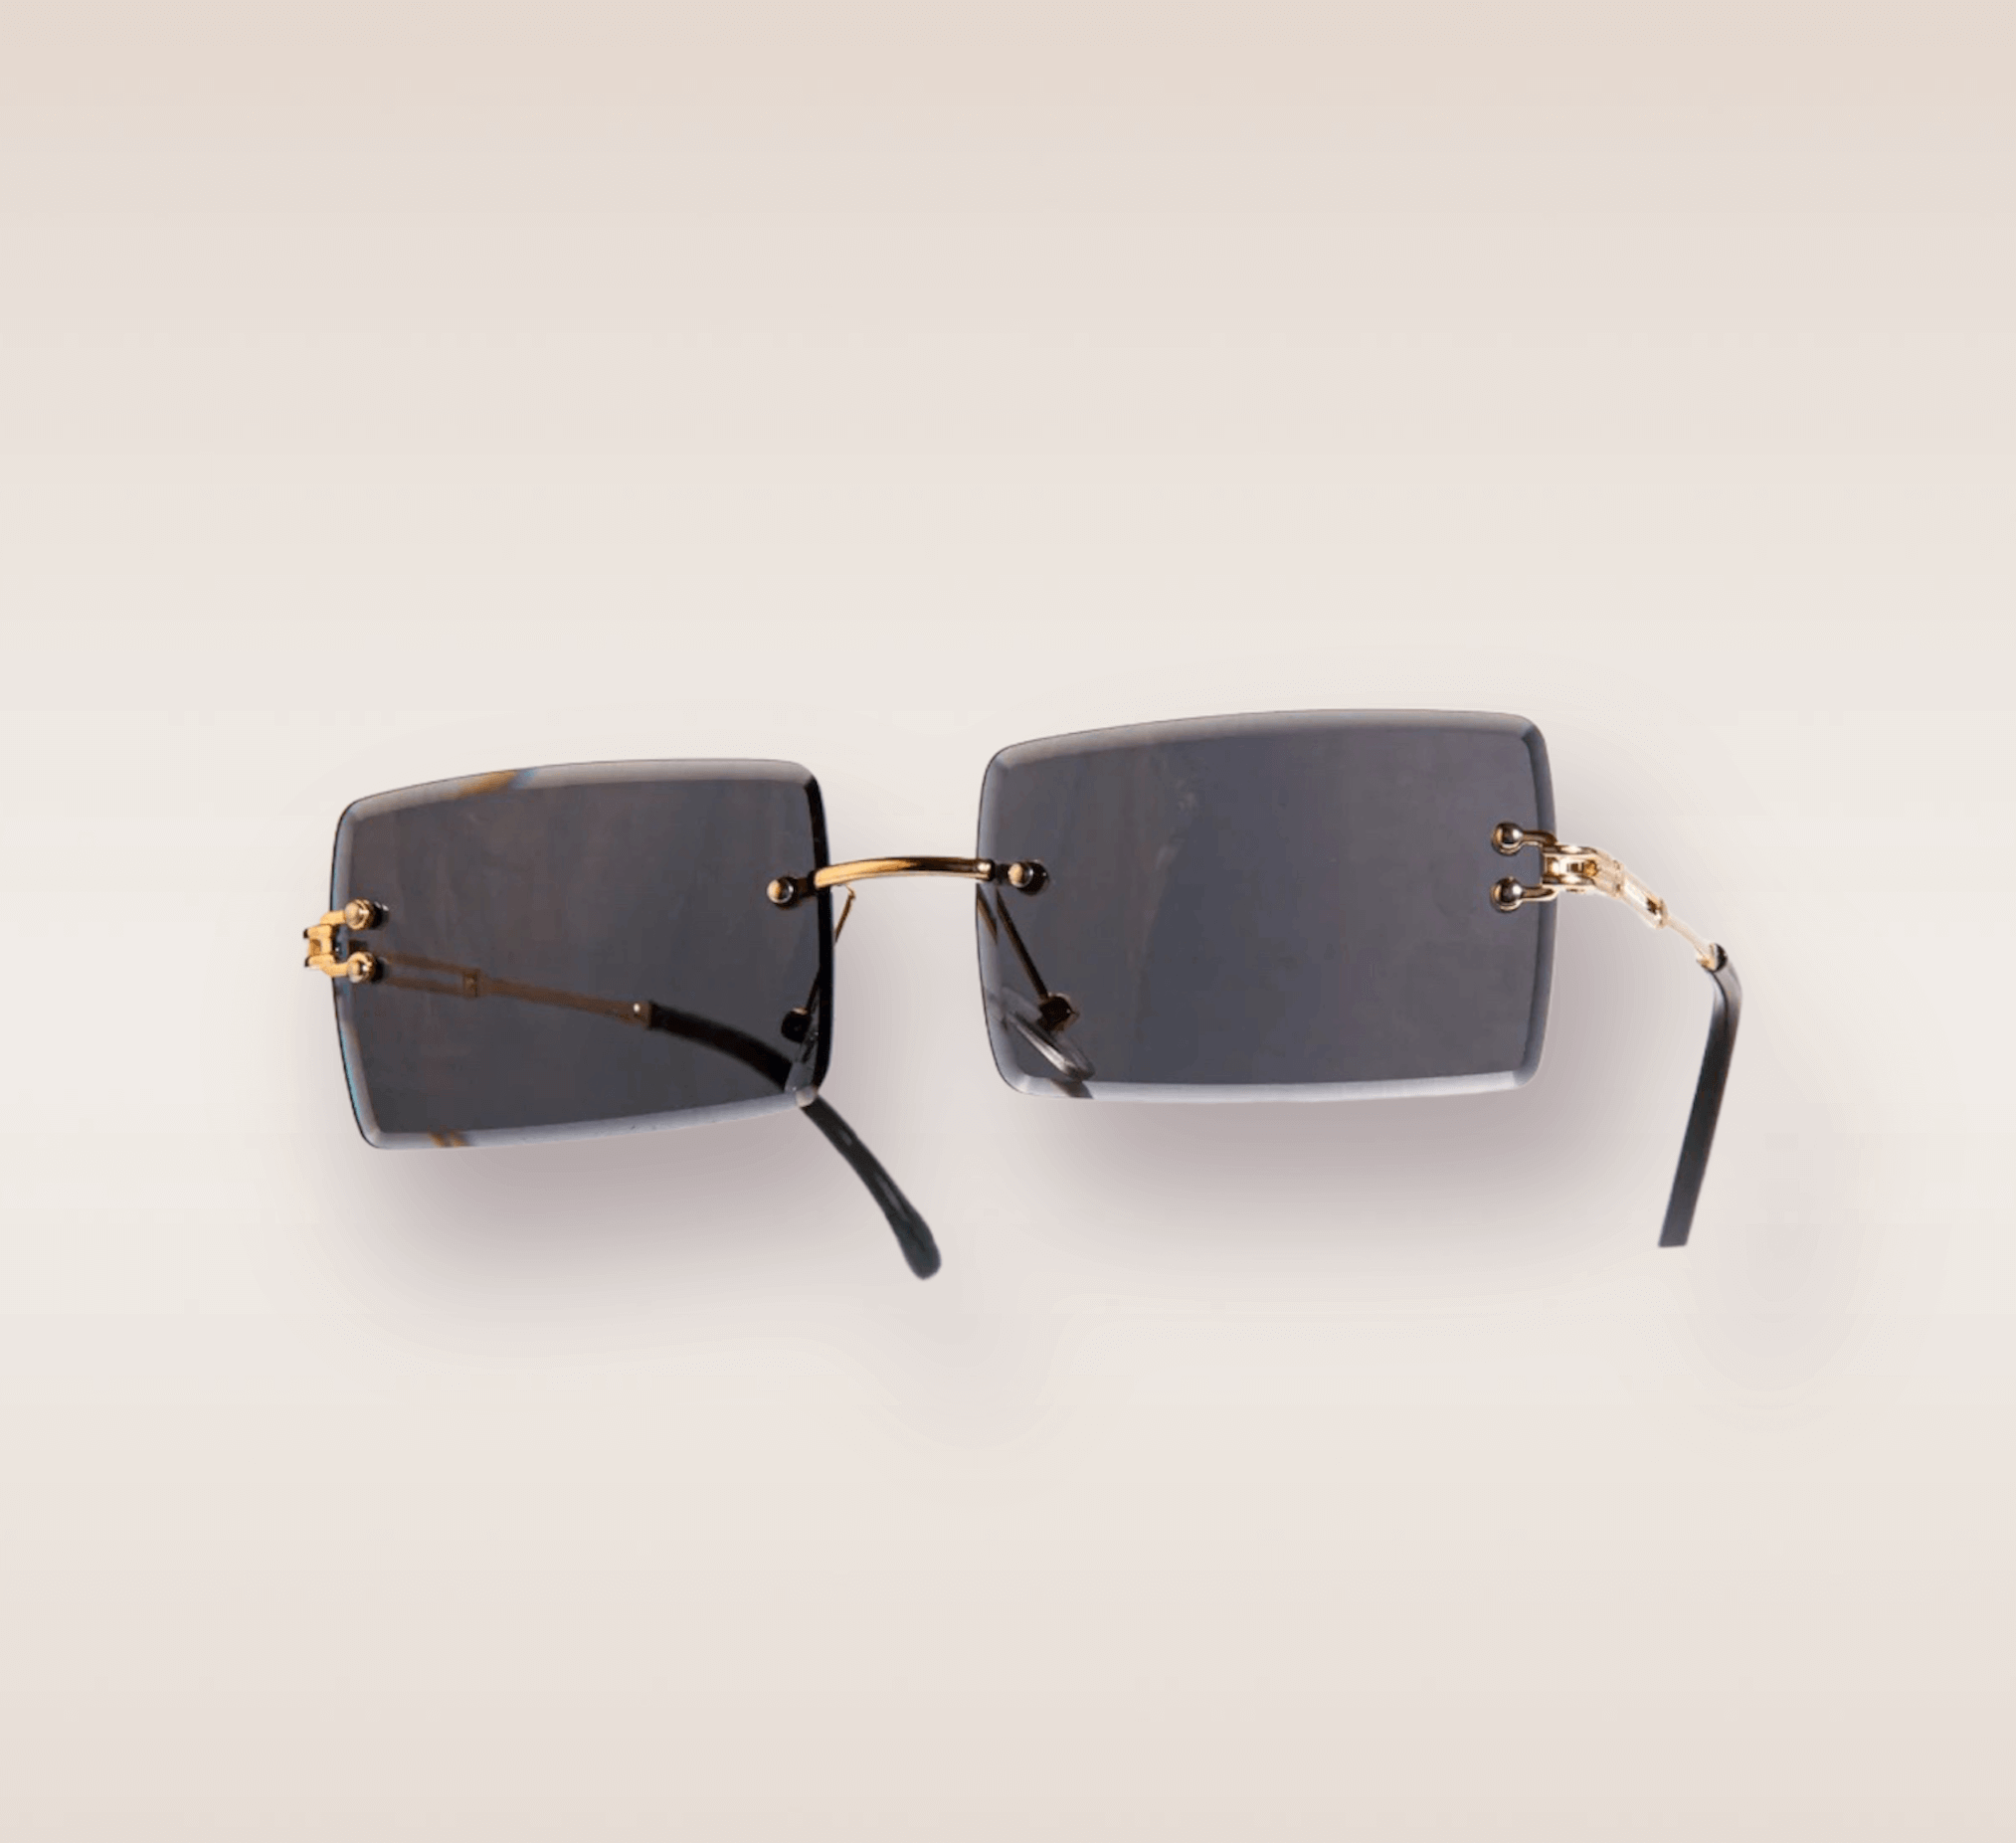 In this up-close shot, we are introduced to the captivating Midnight frames, a stylish and sophisticated eyewear option. The rimless frames feature a mesmerizing black gradient hue. The gold arms add a touch of opulence and refinement, complimenting the black and gray tones with a warm metallic accent. These frames are a true fashion statement, combining modern design with a touch of luxury. 